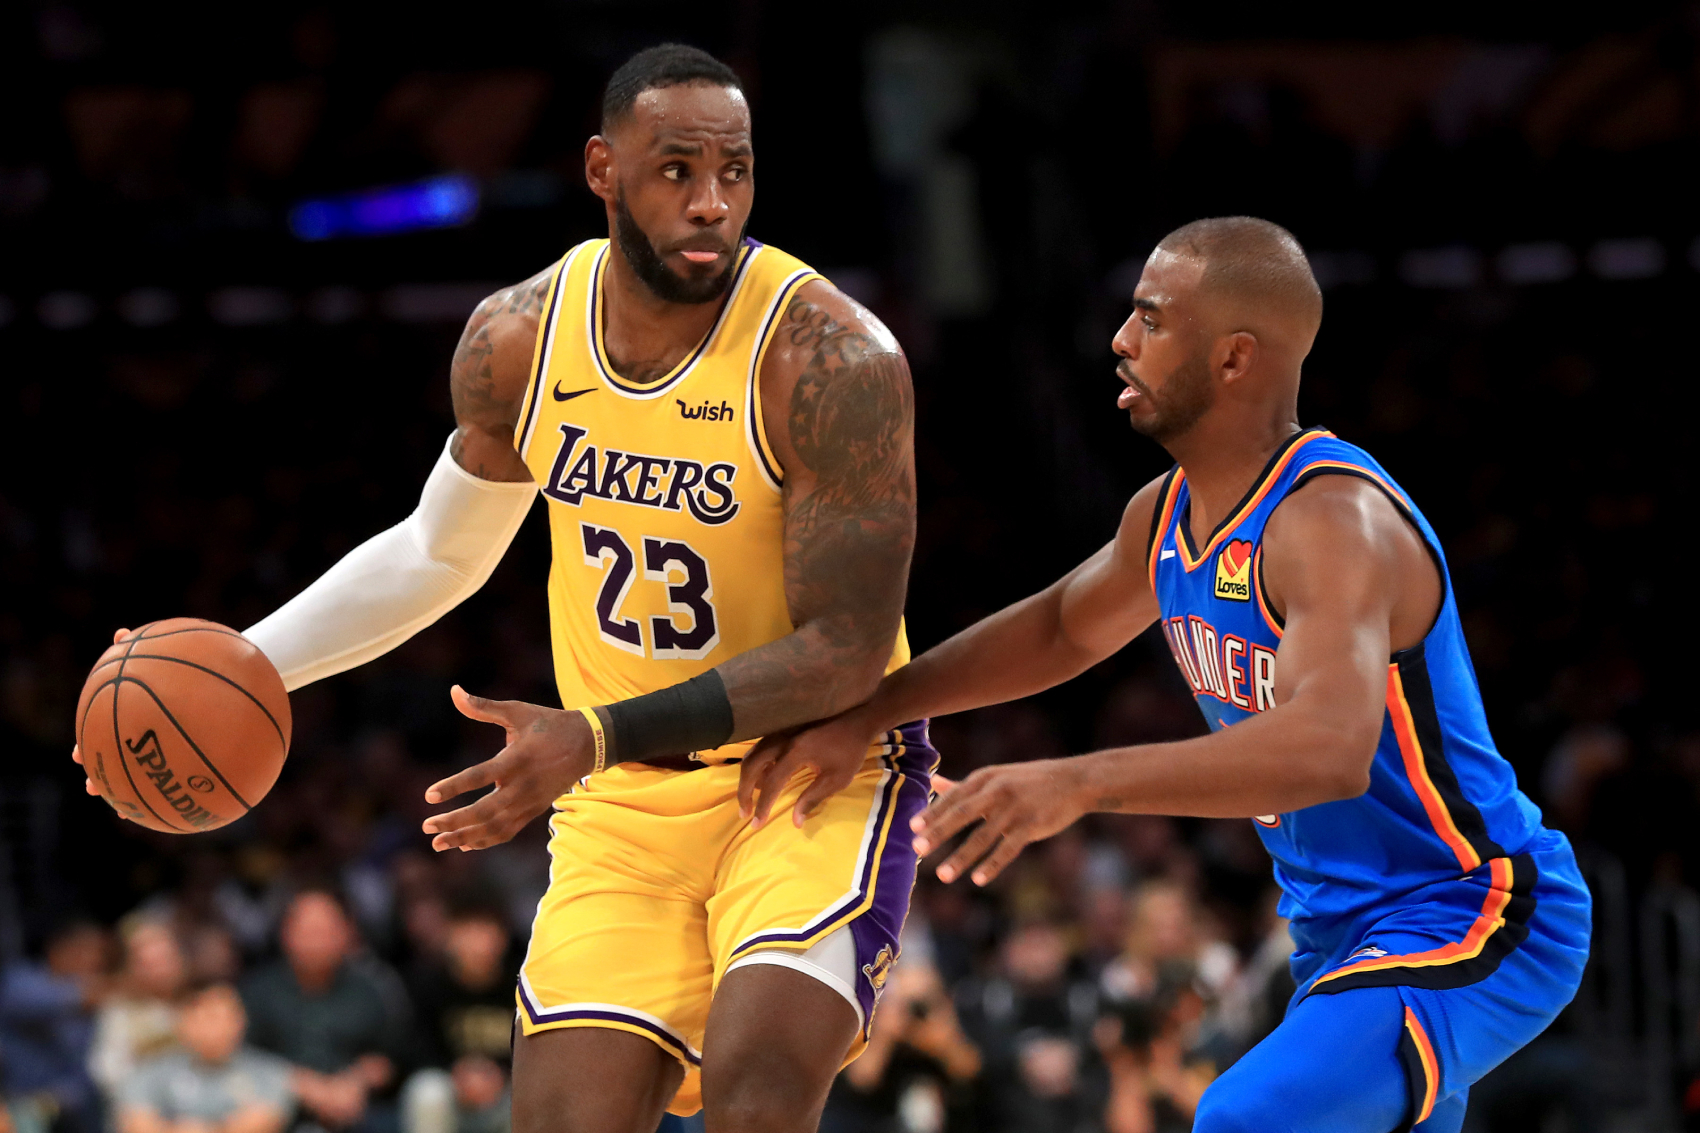 Chris Paul Could Still Play a Role in the Lakers Winning a Championship This Year